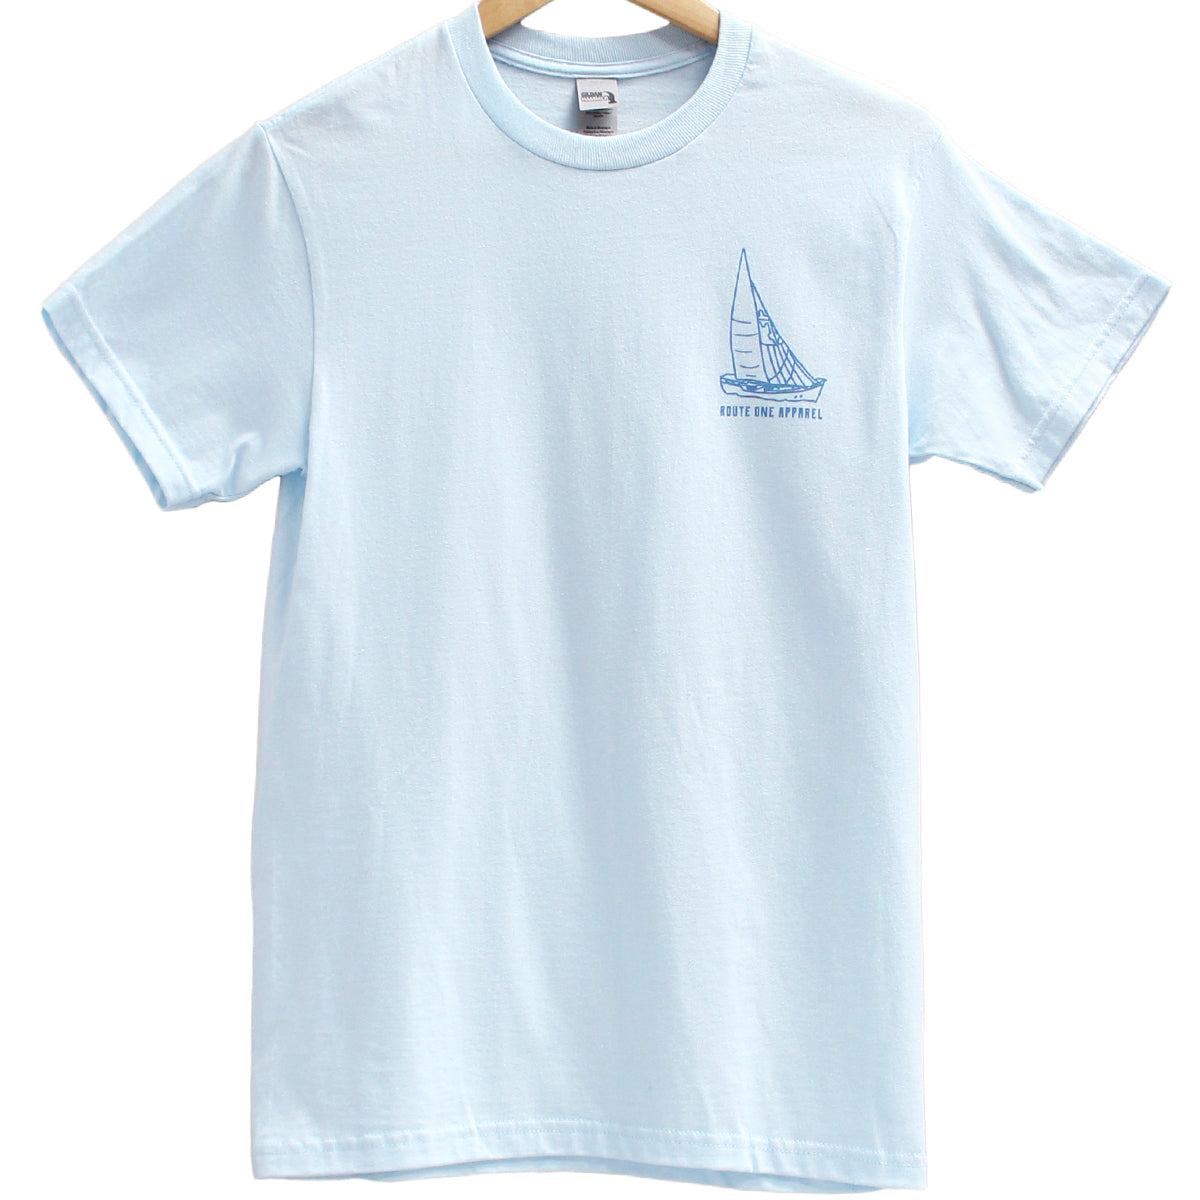 The Chesapeake Is My Happy Place (Chambray) / Shirt - Route One Apparel